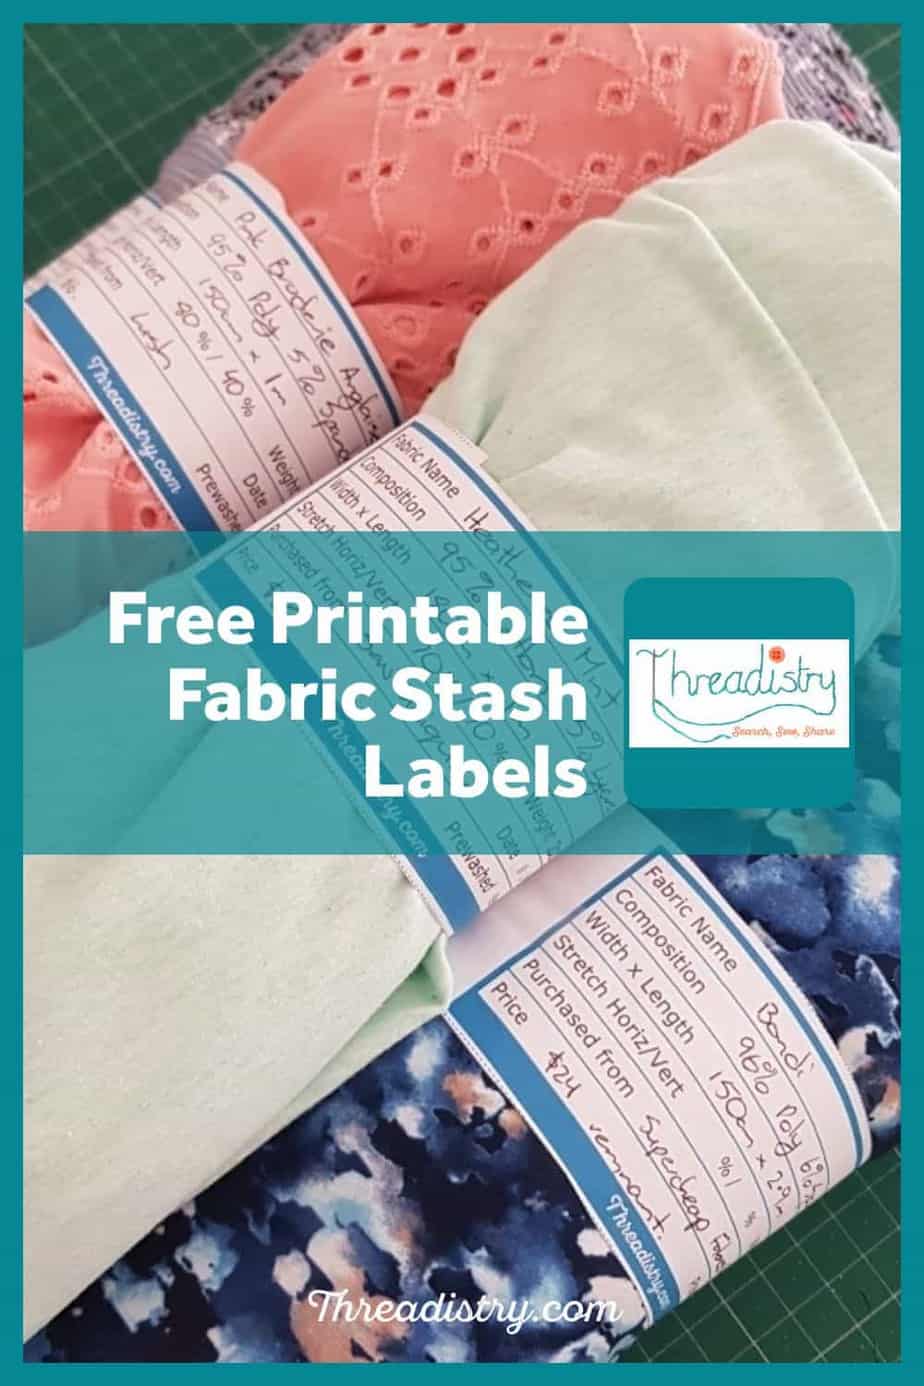 Rolled fabric with label wrapped around with text overlay "Free printable fabric stash labels"